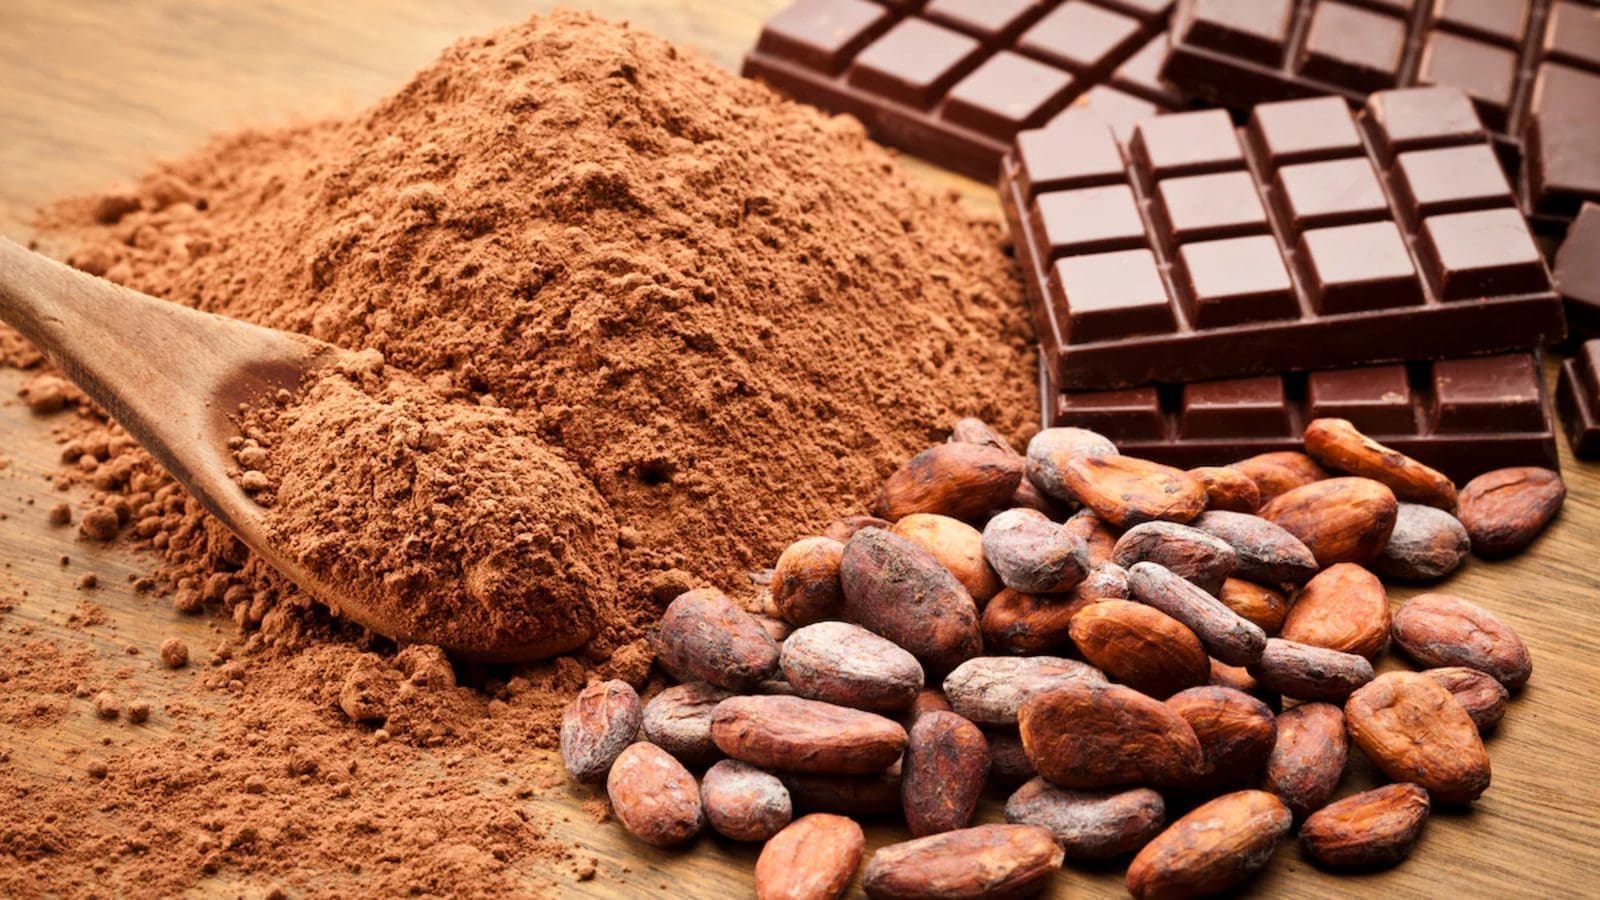 US lifts customs duties on imports of cocoa and derived products from Nigeria